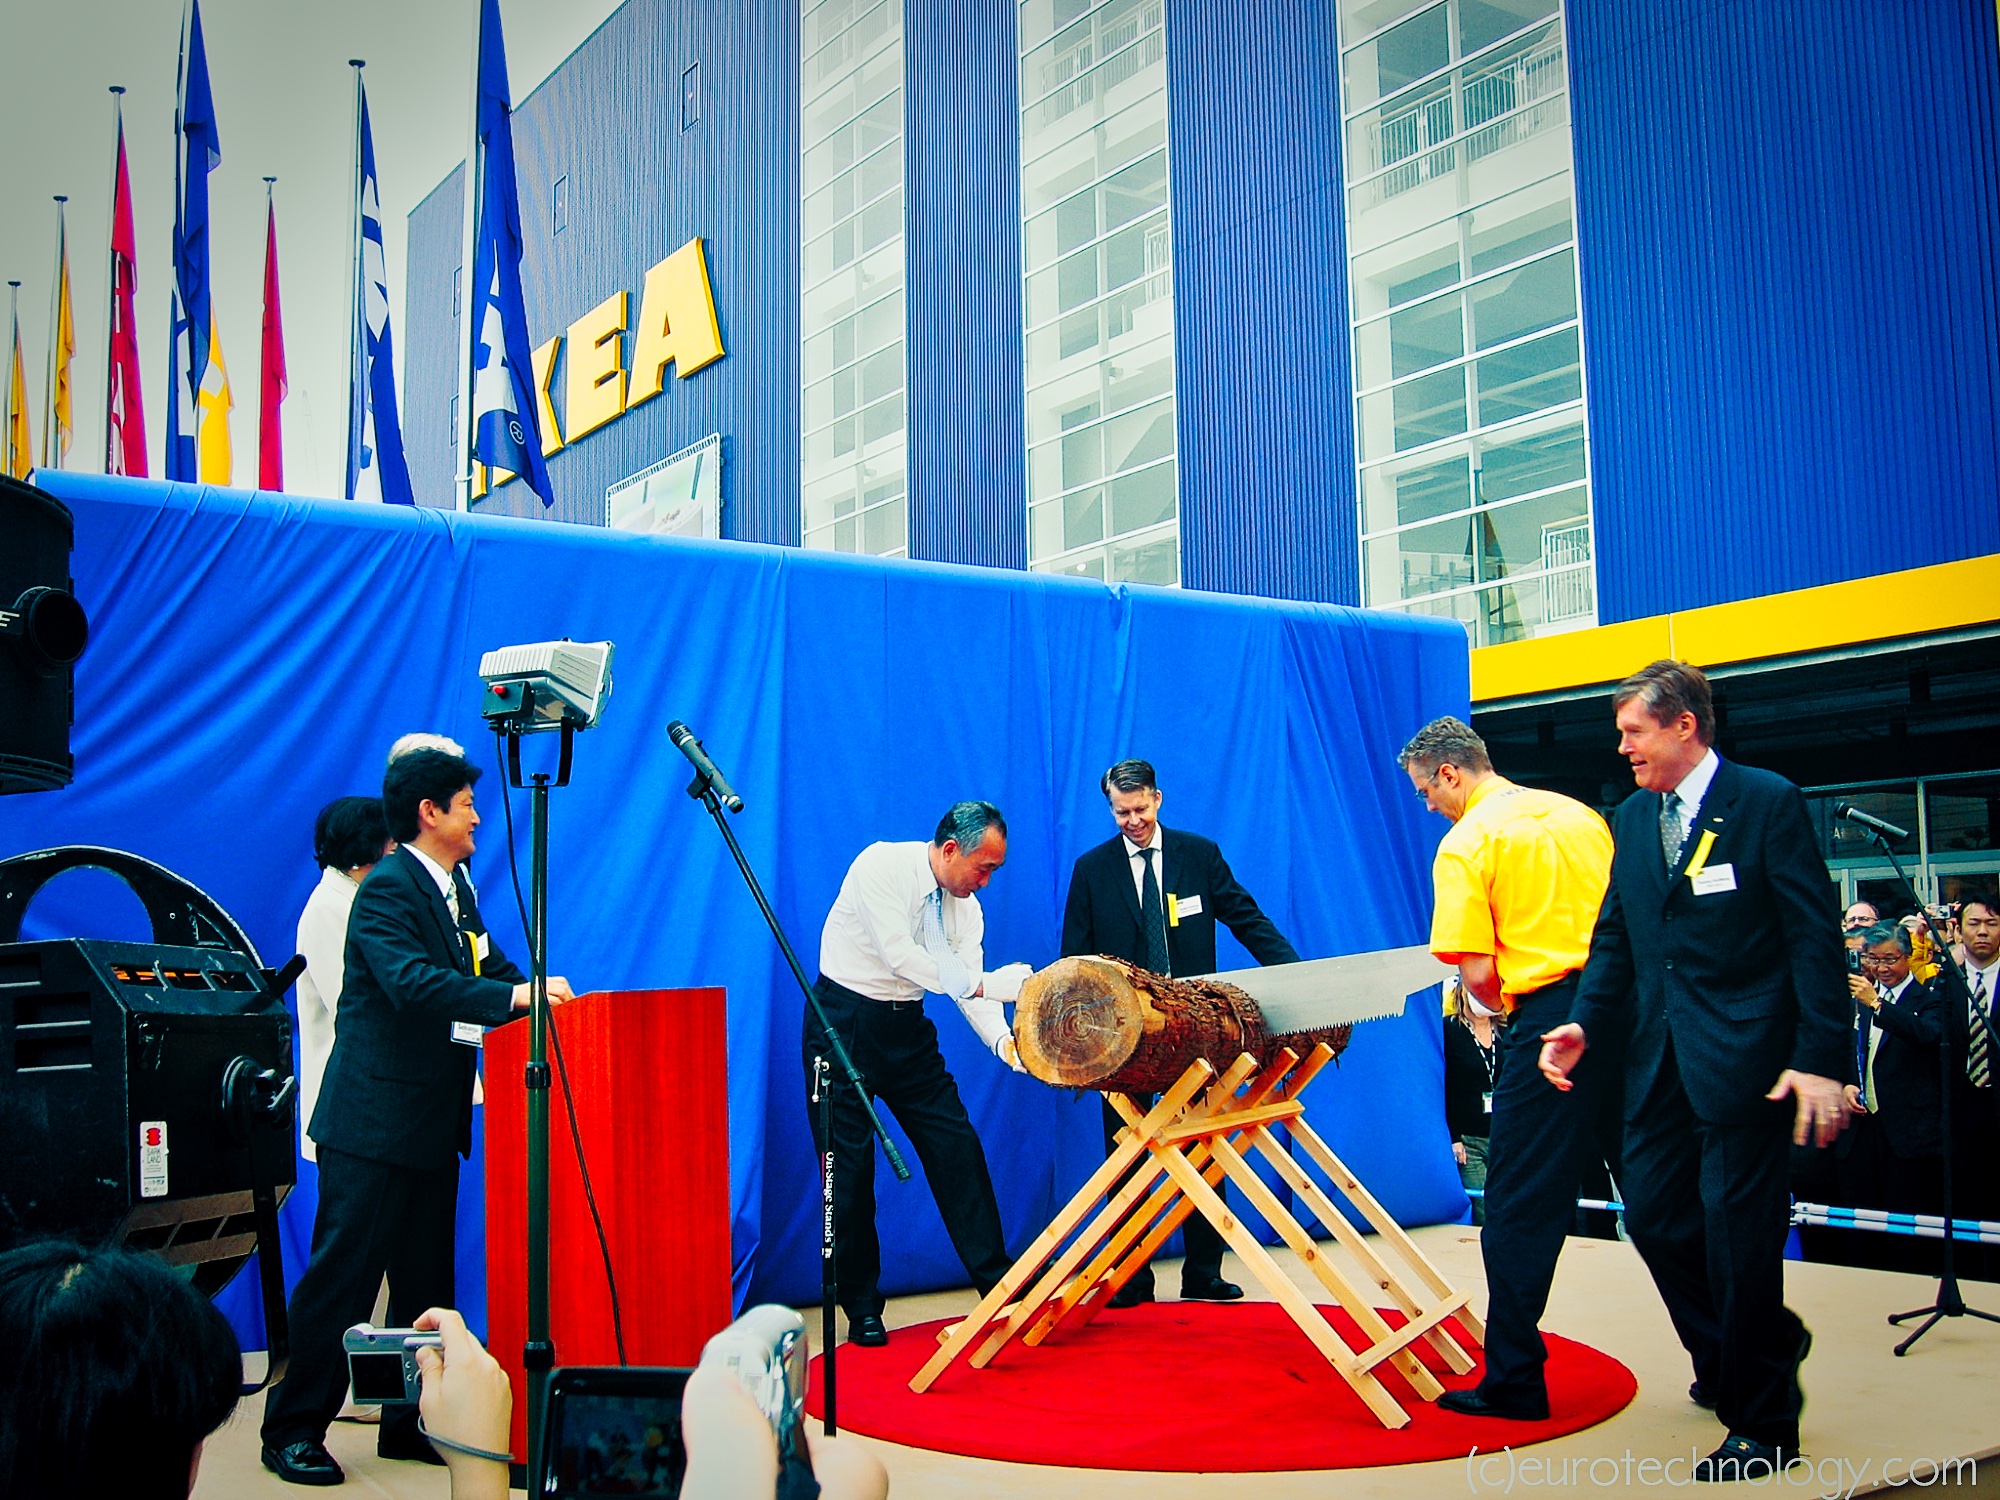 Ikea reenters Japan after 32 years: IKEA’s first try to enter Japan in 1974 failed for IKEA. Now second try in 2006 – a full 32 years later